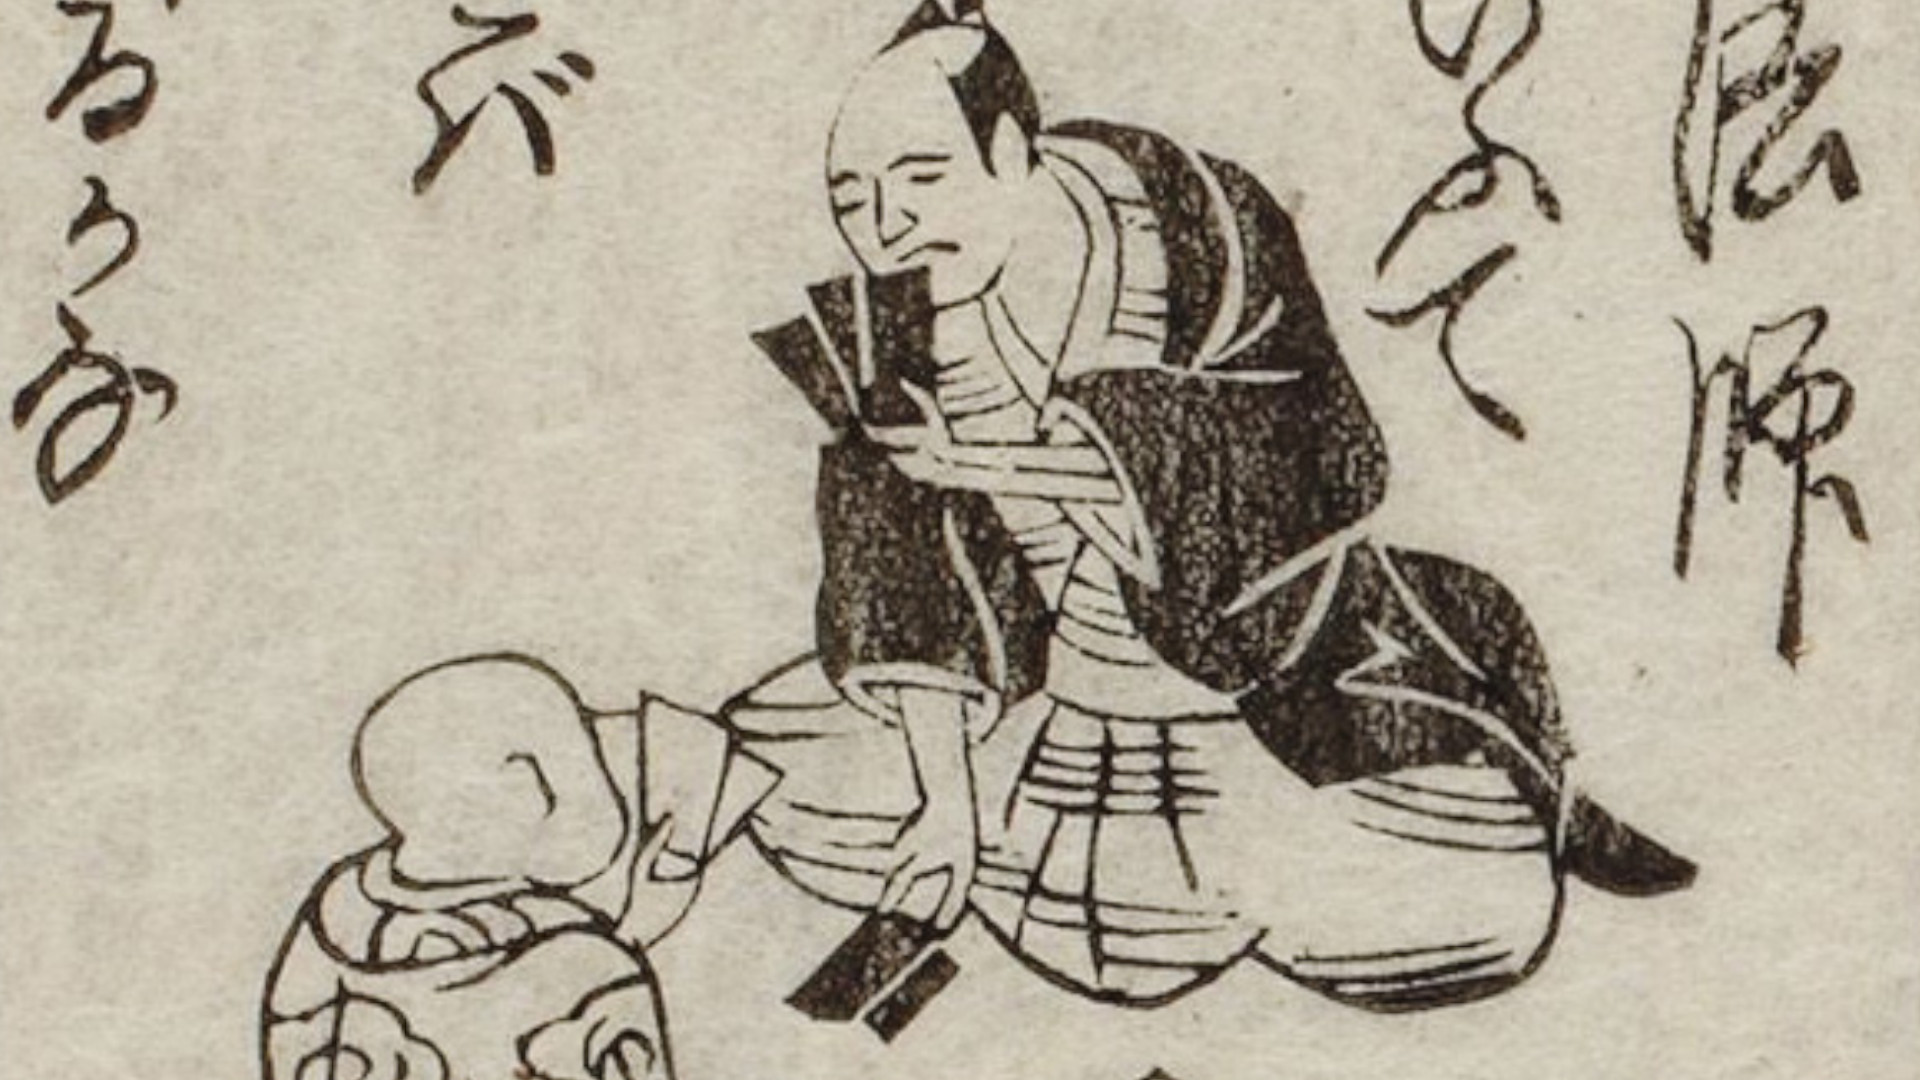 Earliest known depiction of the card game hanafuda, likely from the 1830s.